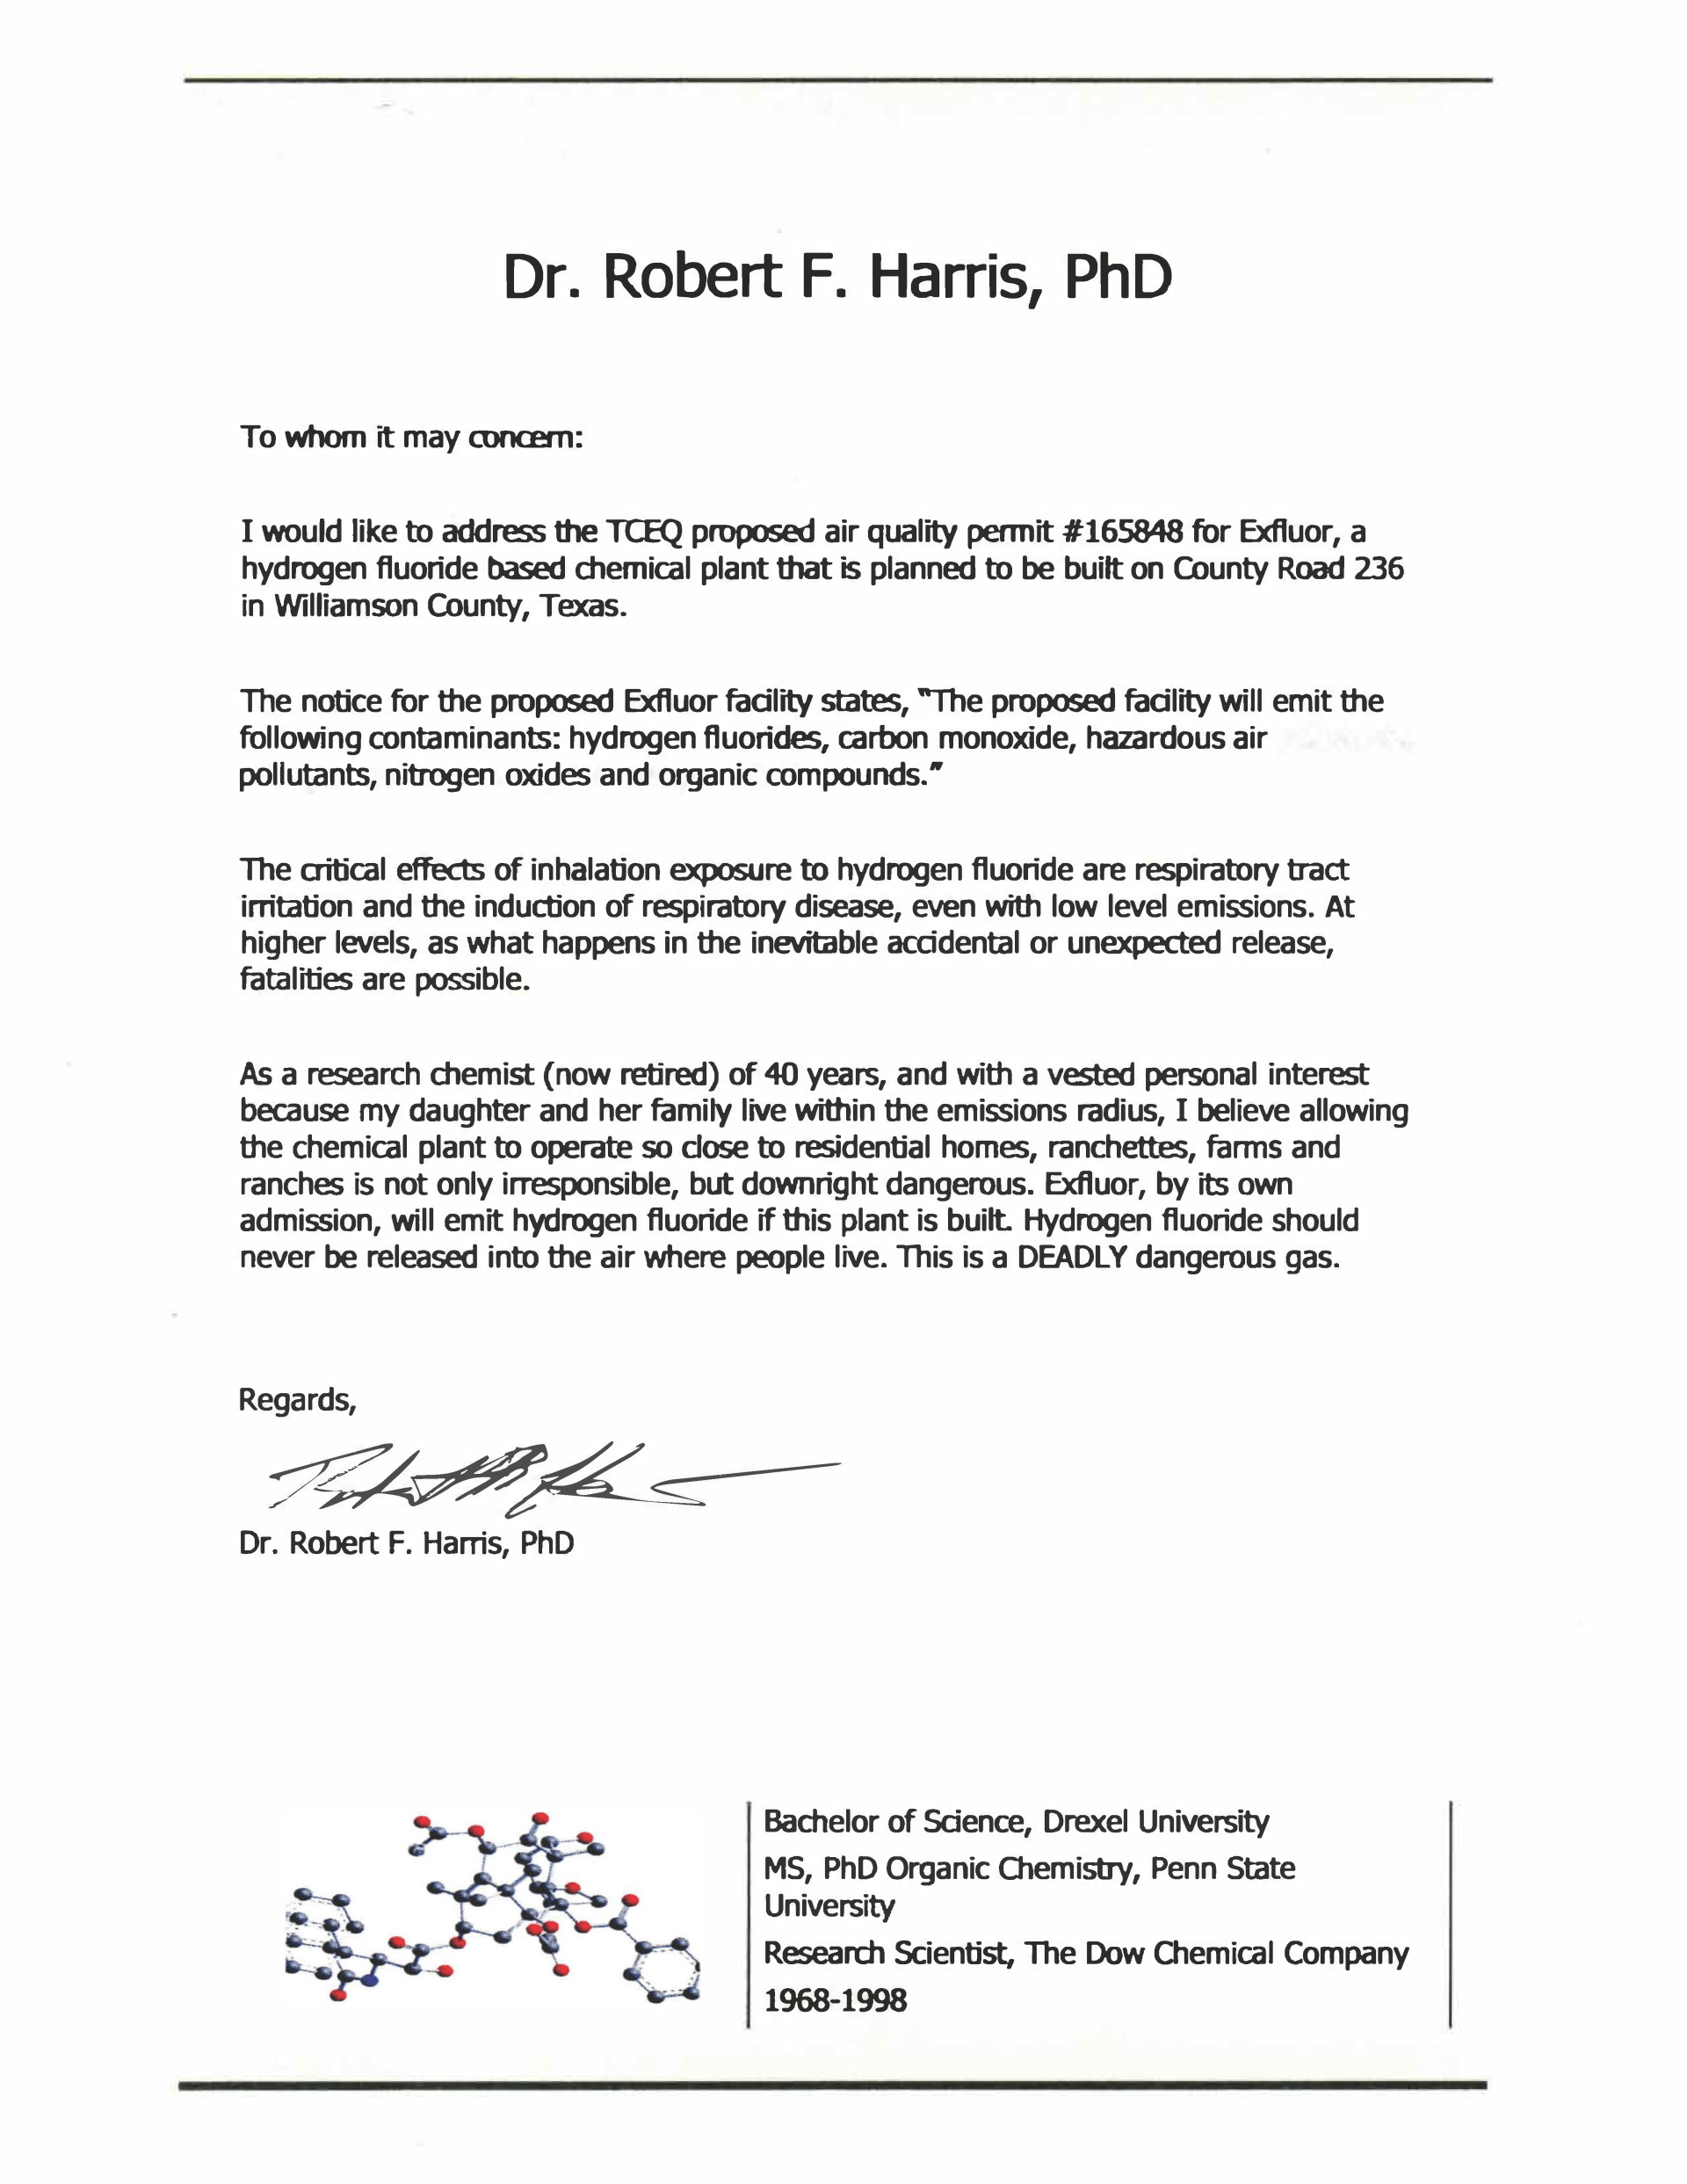 Image of letter transcribed on this news post from Dr. Robert F. Harris, PhD, retired research chemist Dow Chemical Company